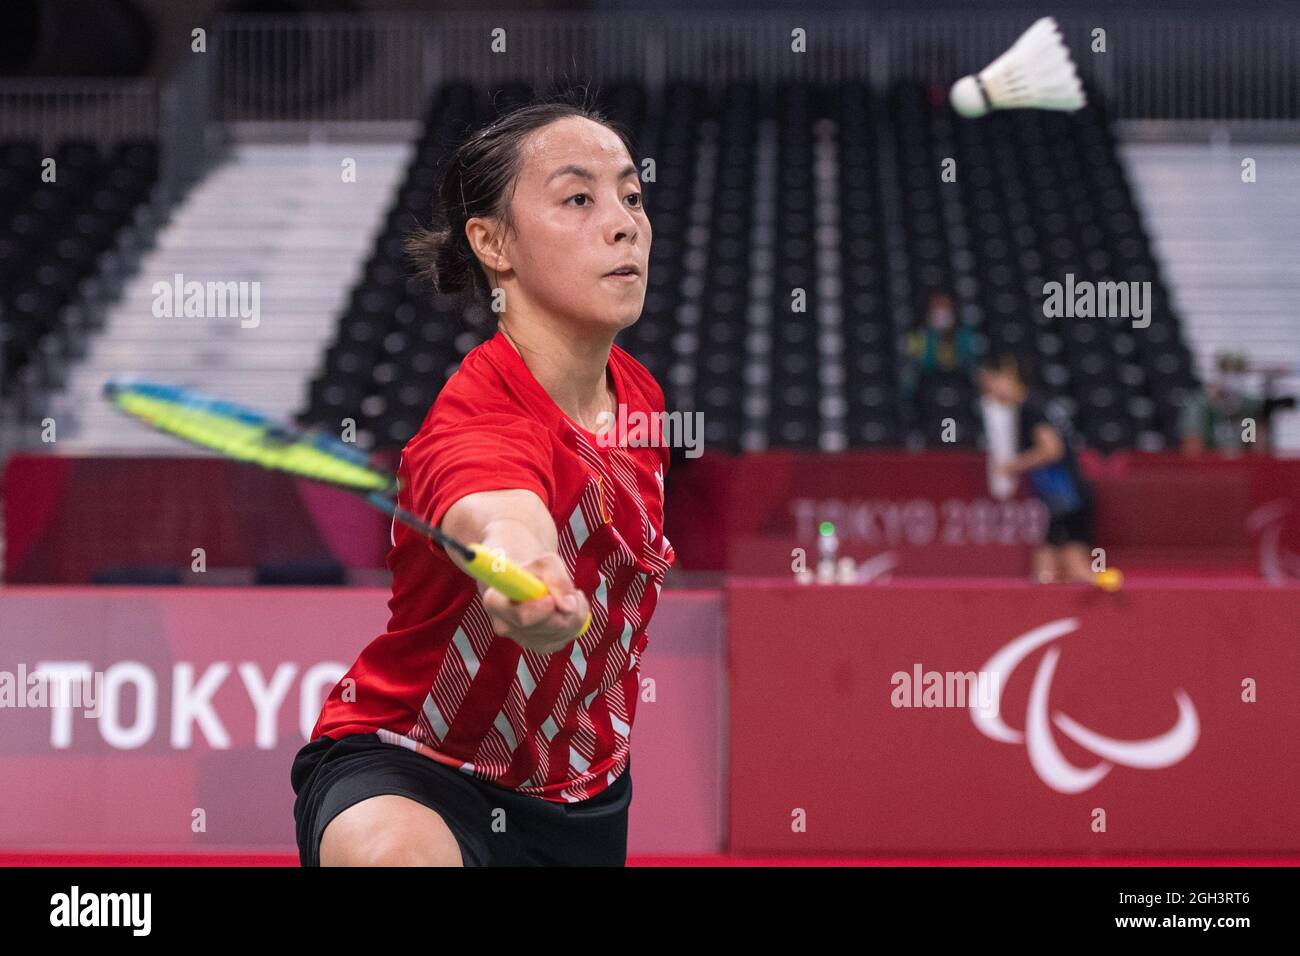 Tokyo, Japan. 5th Sep, 2021. Cheng Hefang of China hits a return during the women's singles SL4 gold medal match against Oktila Leani Ratri of Indonesia at the badminton event of the Tokyo 2020 Paralympic Games in Tokyo, Japan, Sept. 5, 2021. Credit: Cheong Kam Ka/Xinhua/Alamy Live News Stock Photo